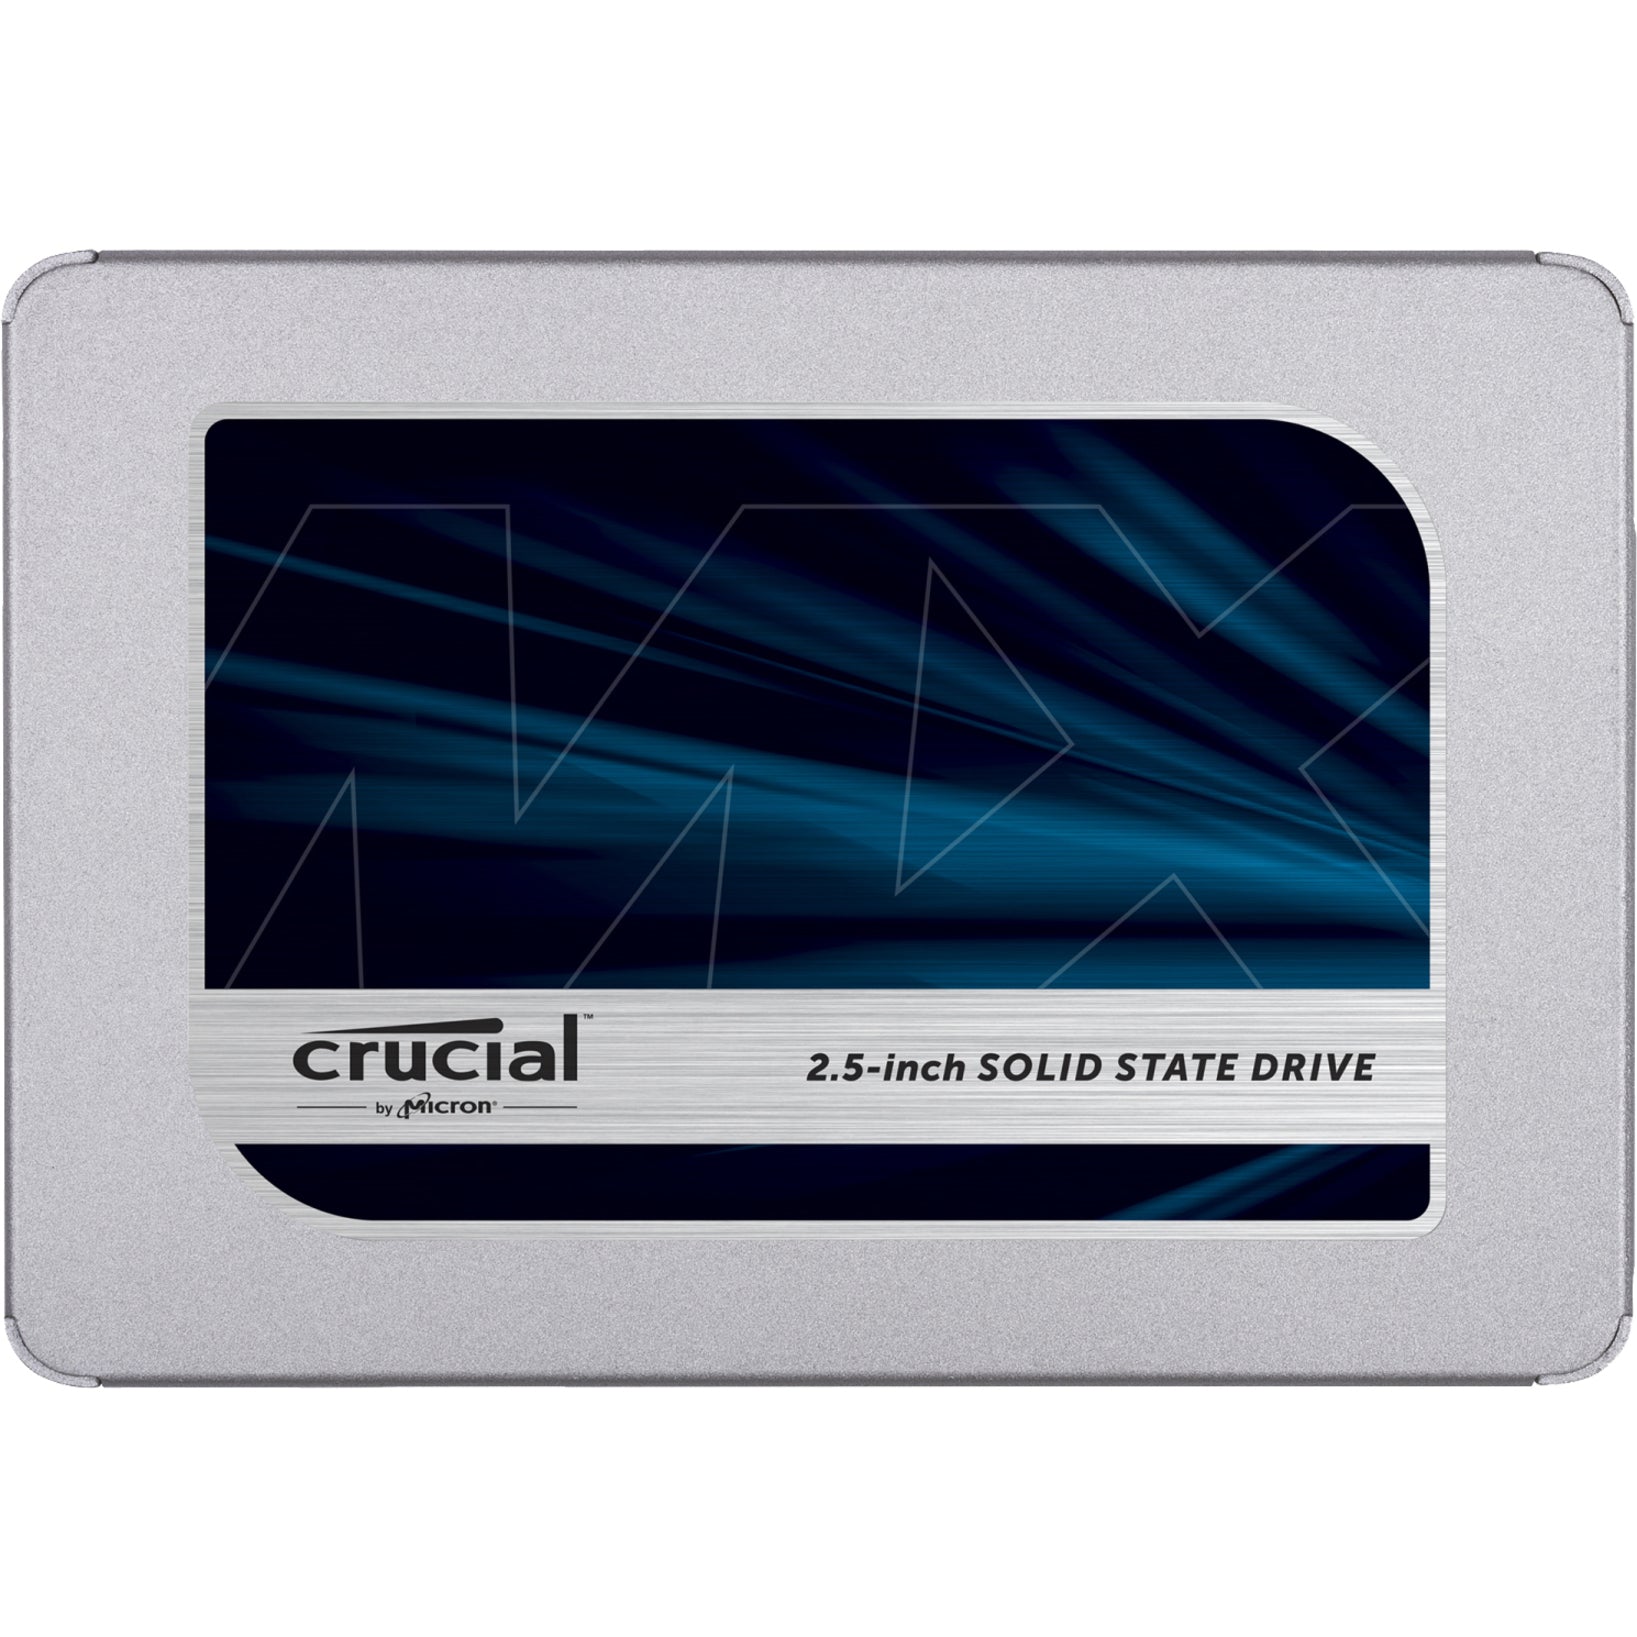 Crucial CT250MX500SSD1 MX500 2.5-inch Solid State Drive, 250GB Storage Capacity, 5 Year Warranty